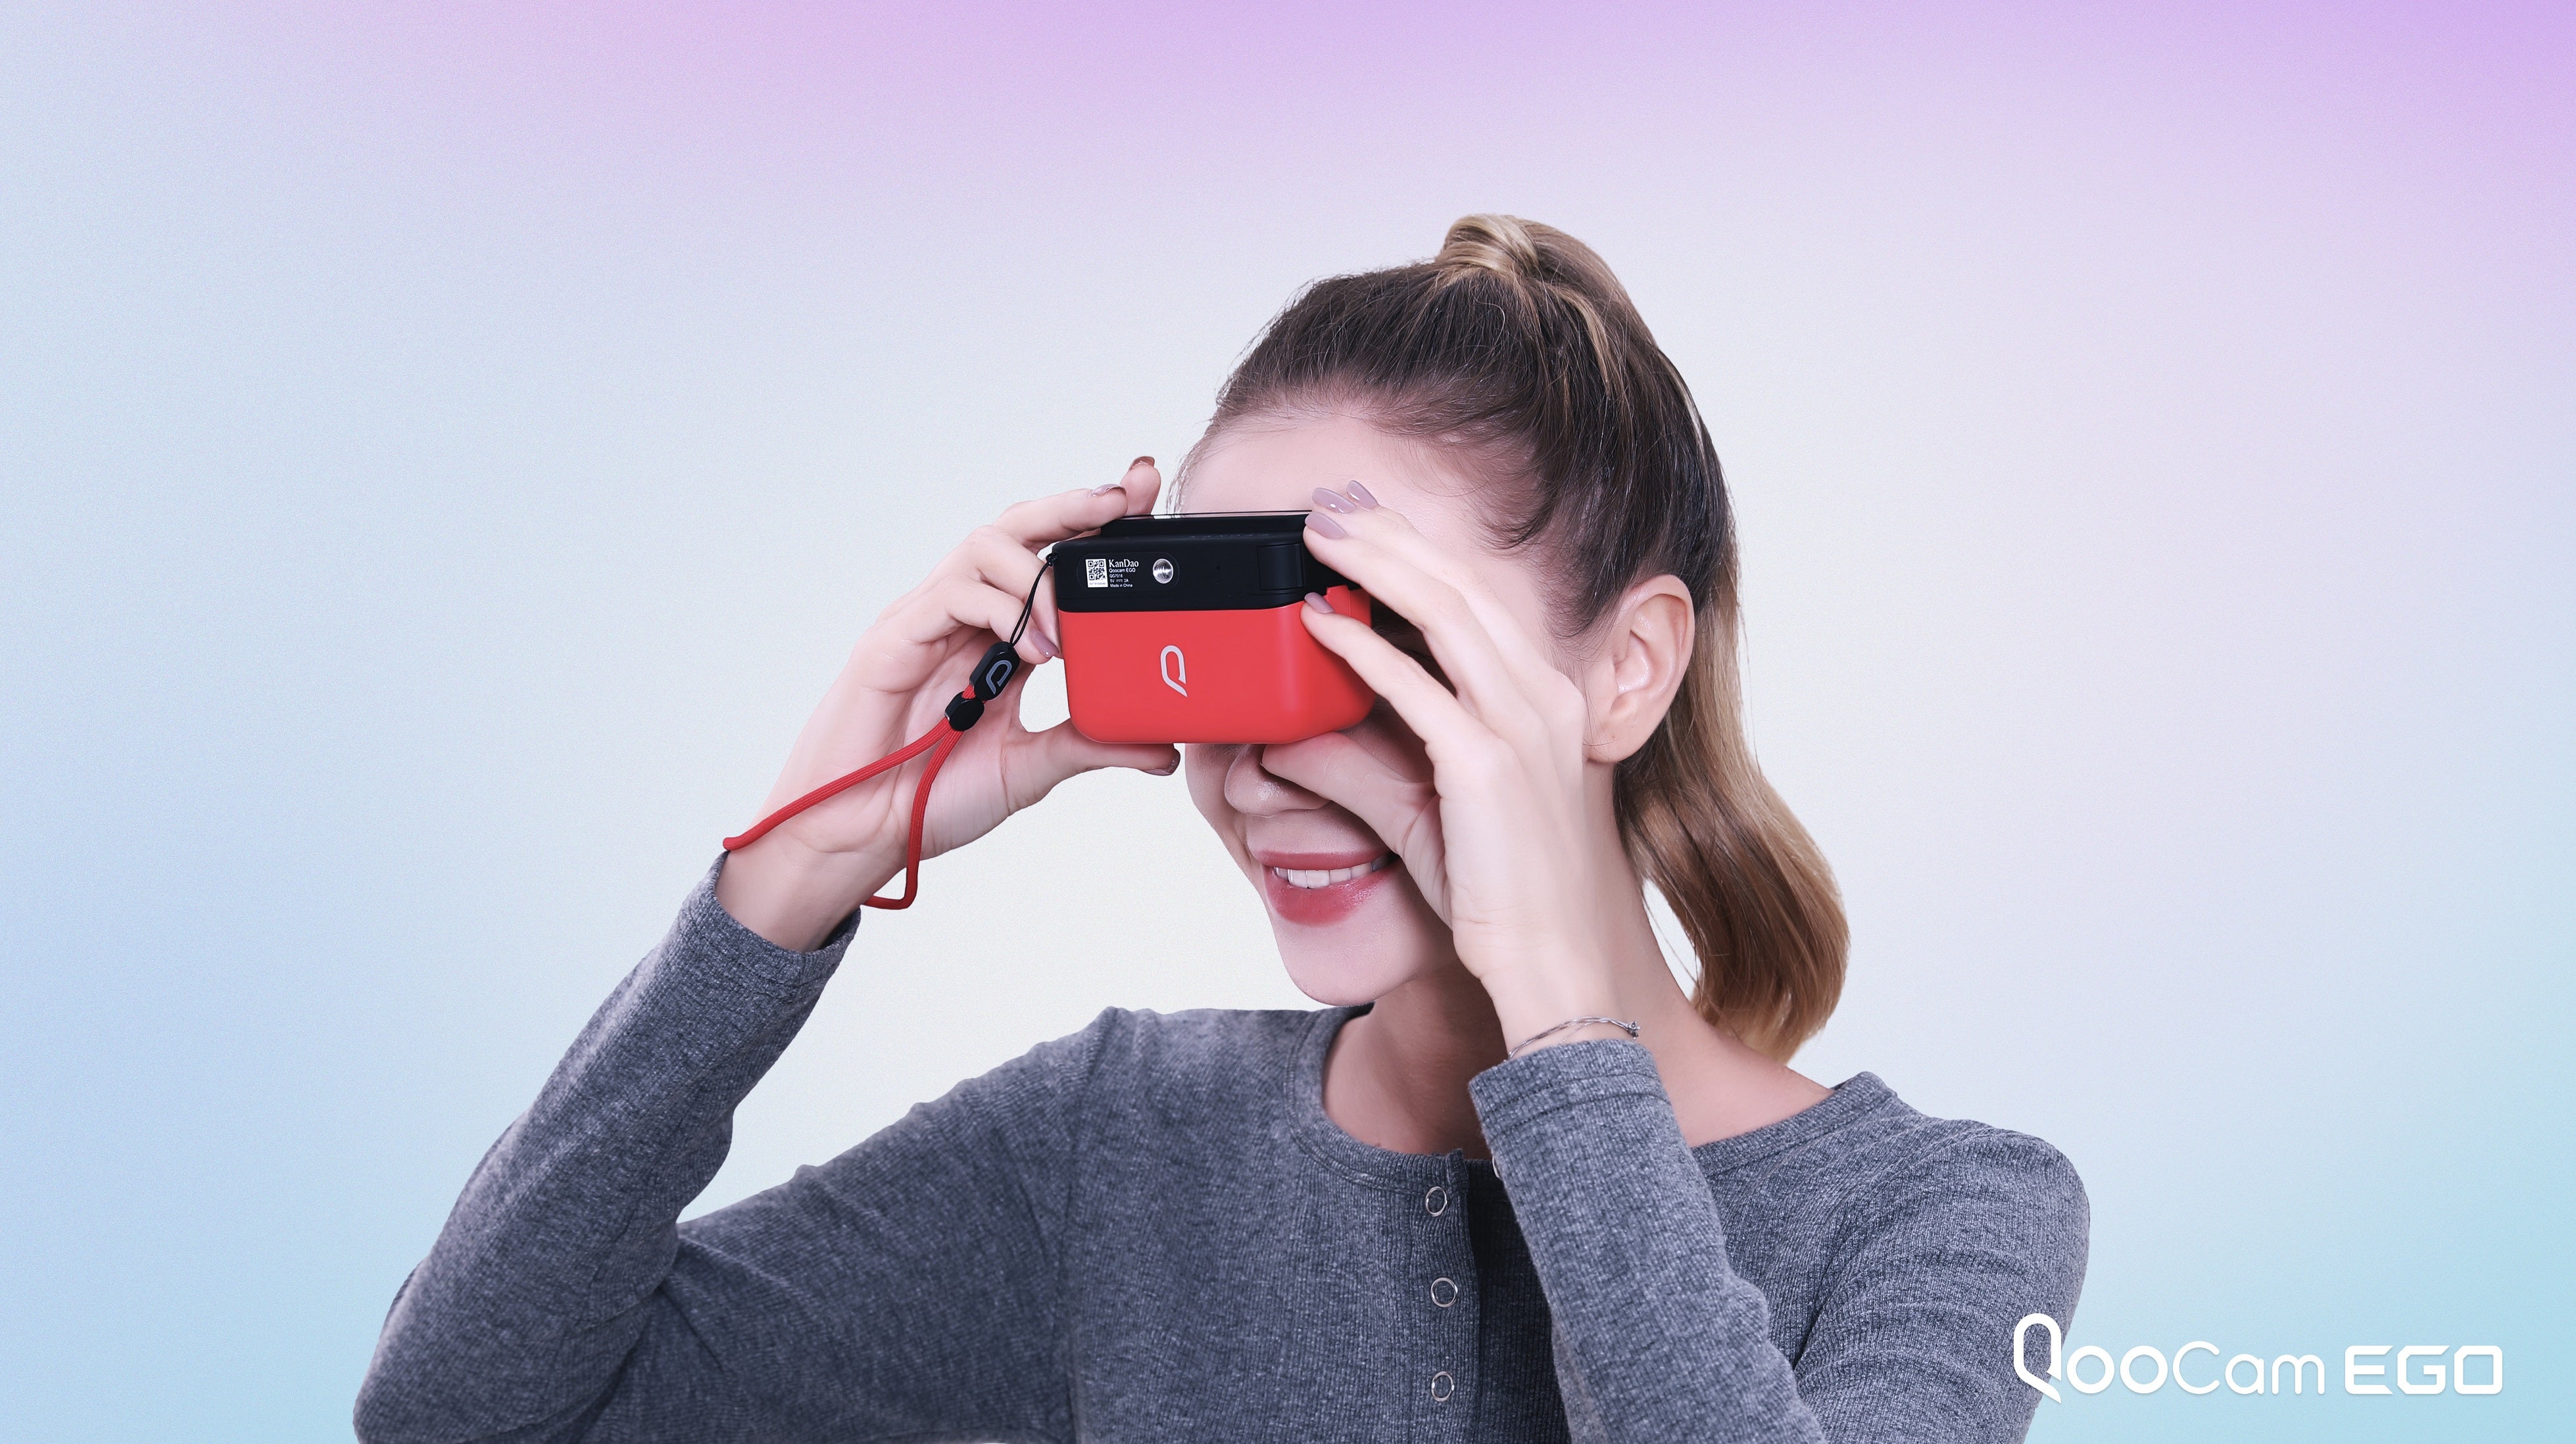 Qoocam EGO: The world’s first 3D stereoscopic camera with an attachable view for instant playback